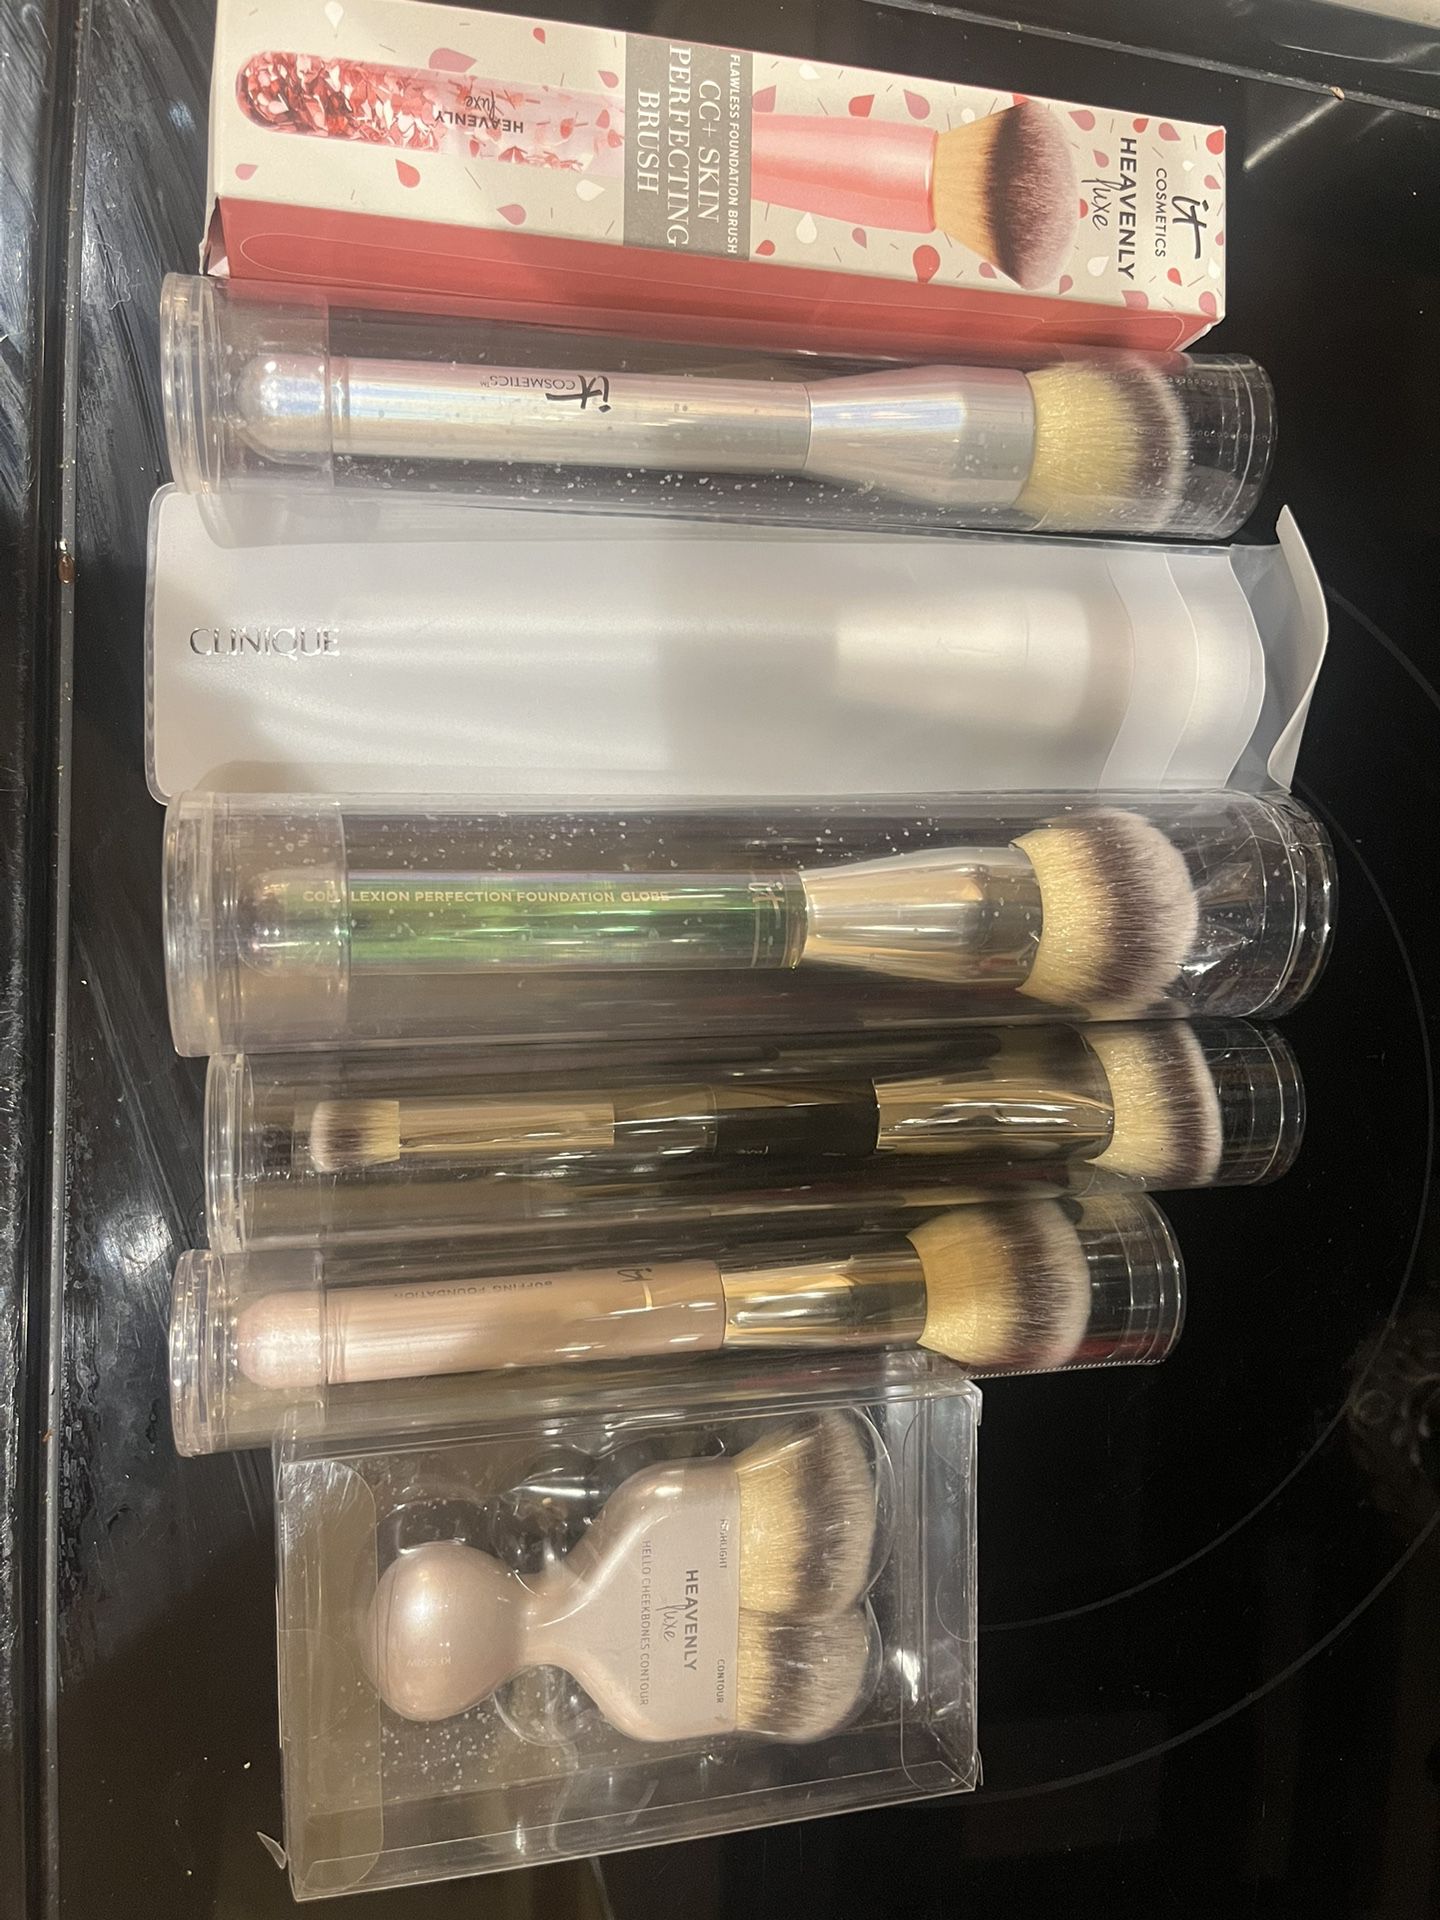 Large Lot Of “It Cosmetics” Brand Make Up Brushes 